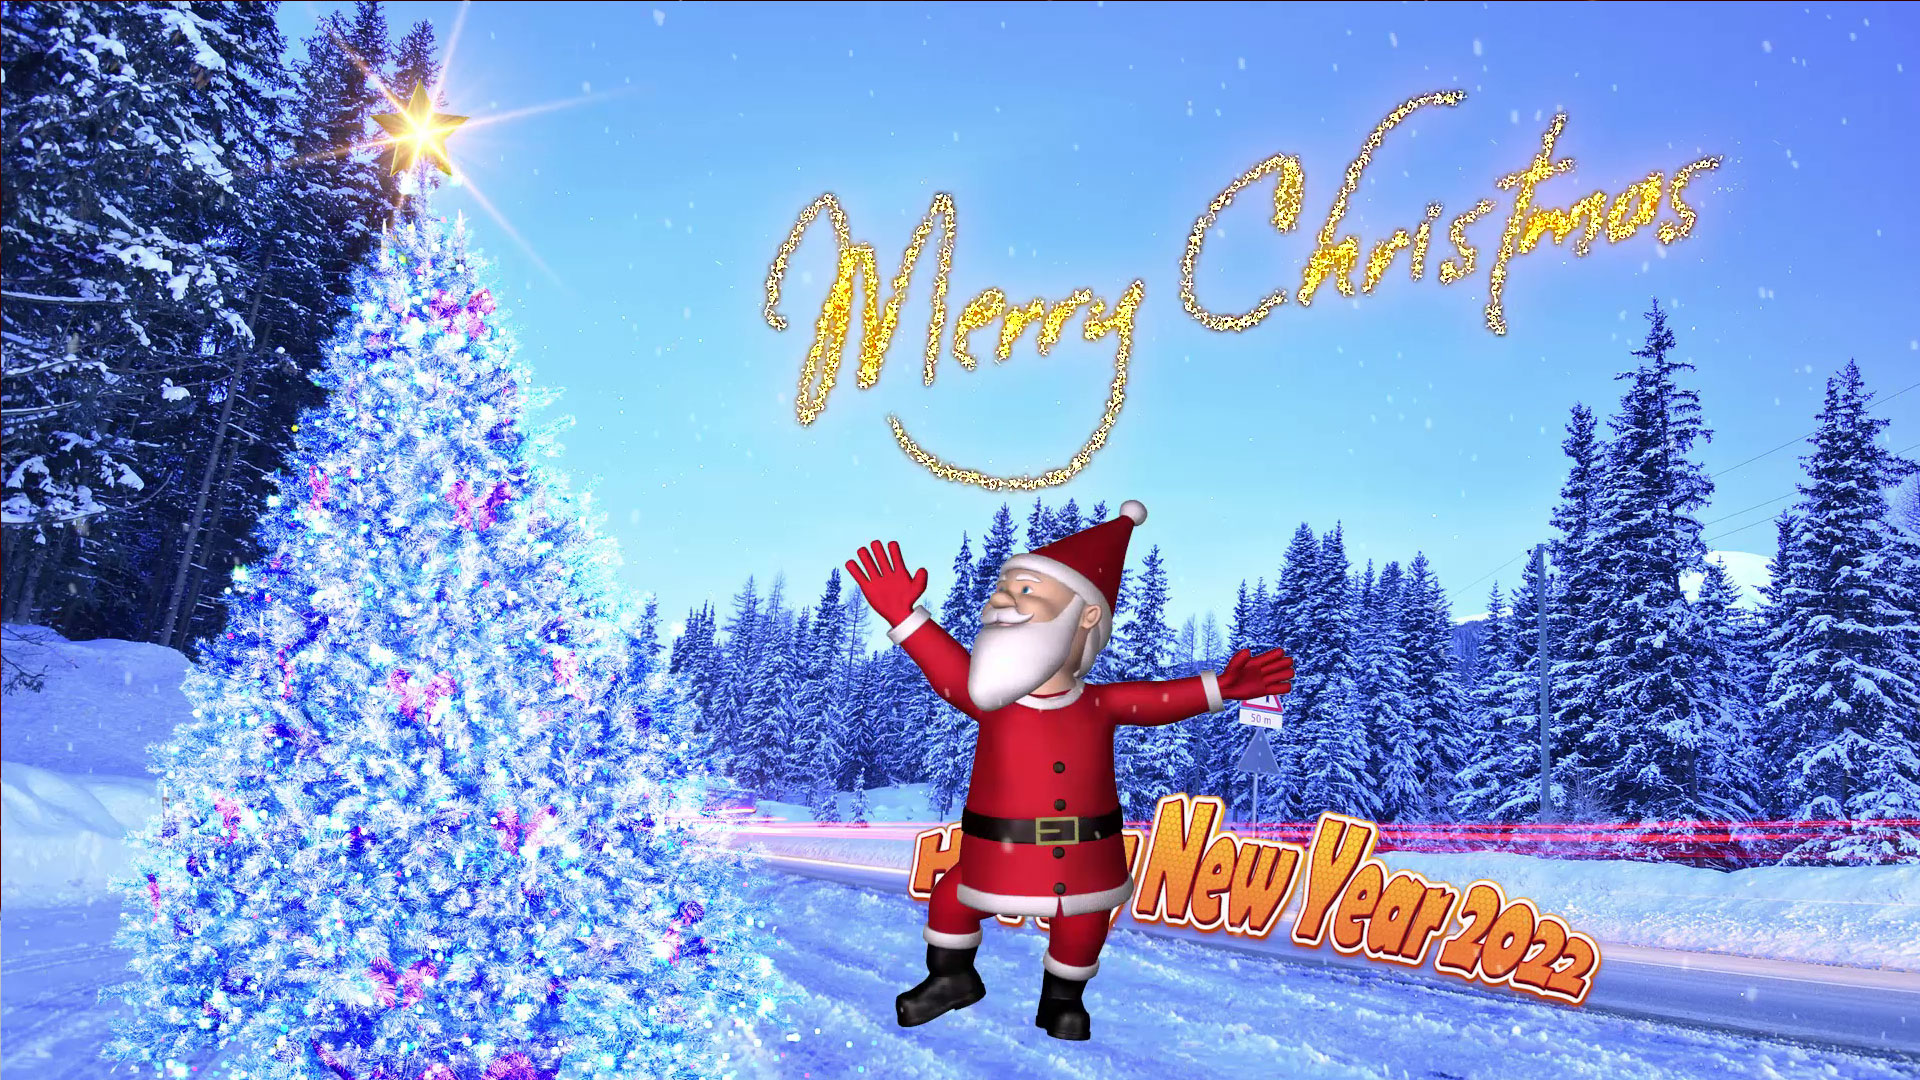 🎄Merry Christmas and Happy New Year 2023 🎄🎅🎄🎄 | All Design Creative